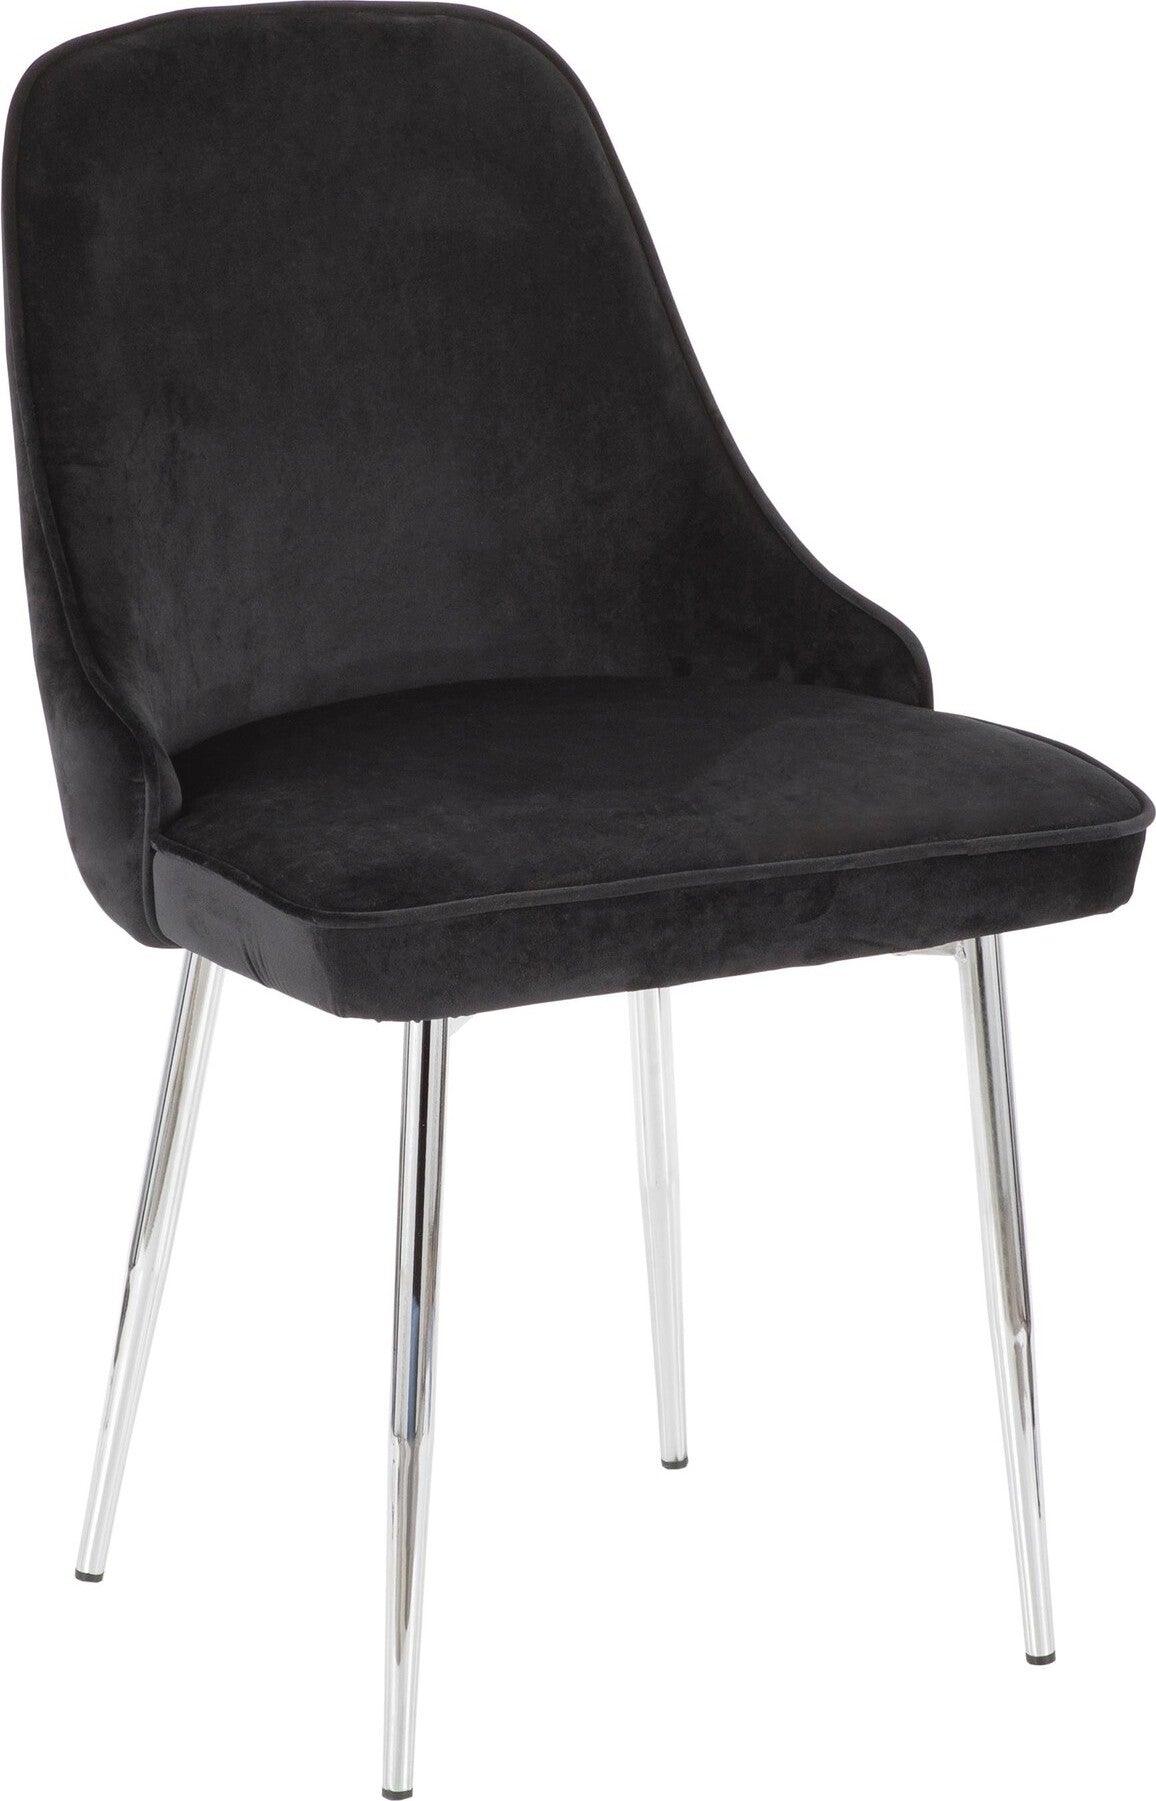 Lumisource Dining Chairs - Marcel Contemporary Dining Chair with Chrome Frame and Black Velvet Fabric (Set of 2)